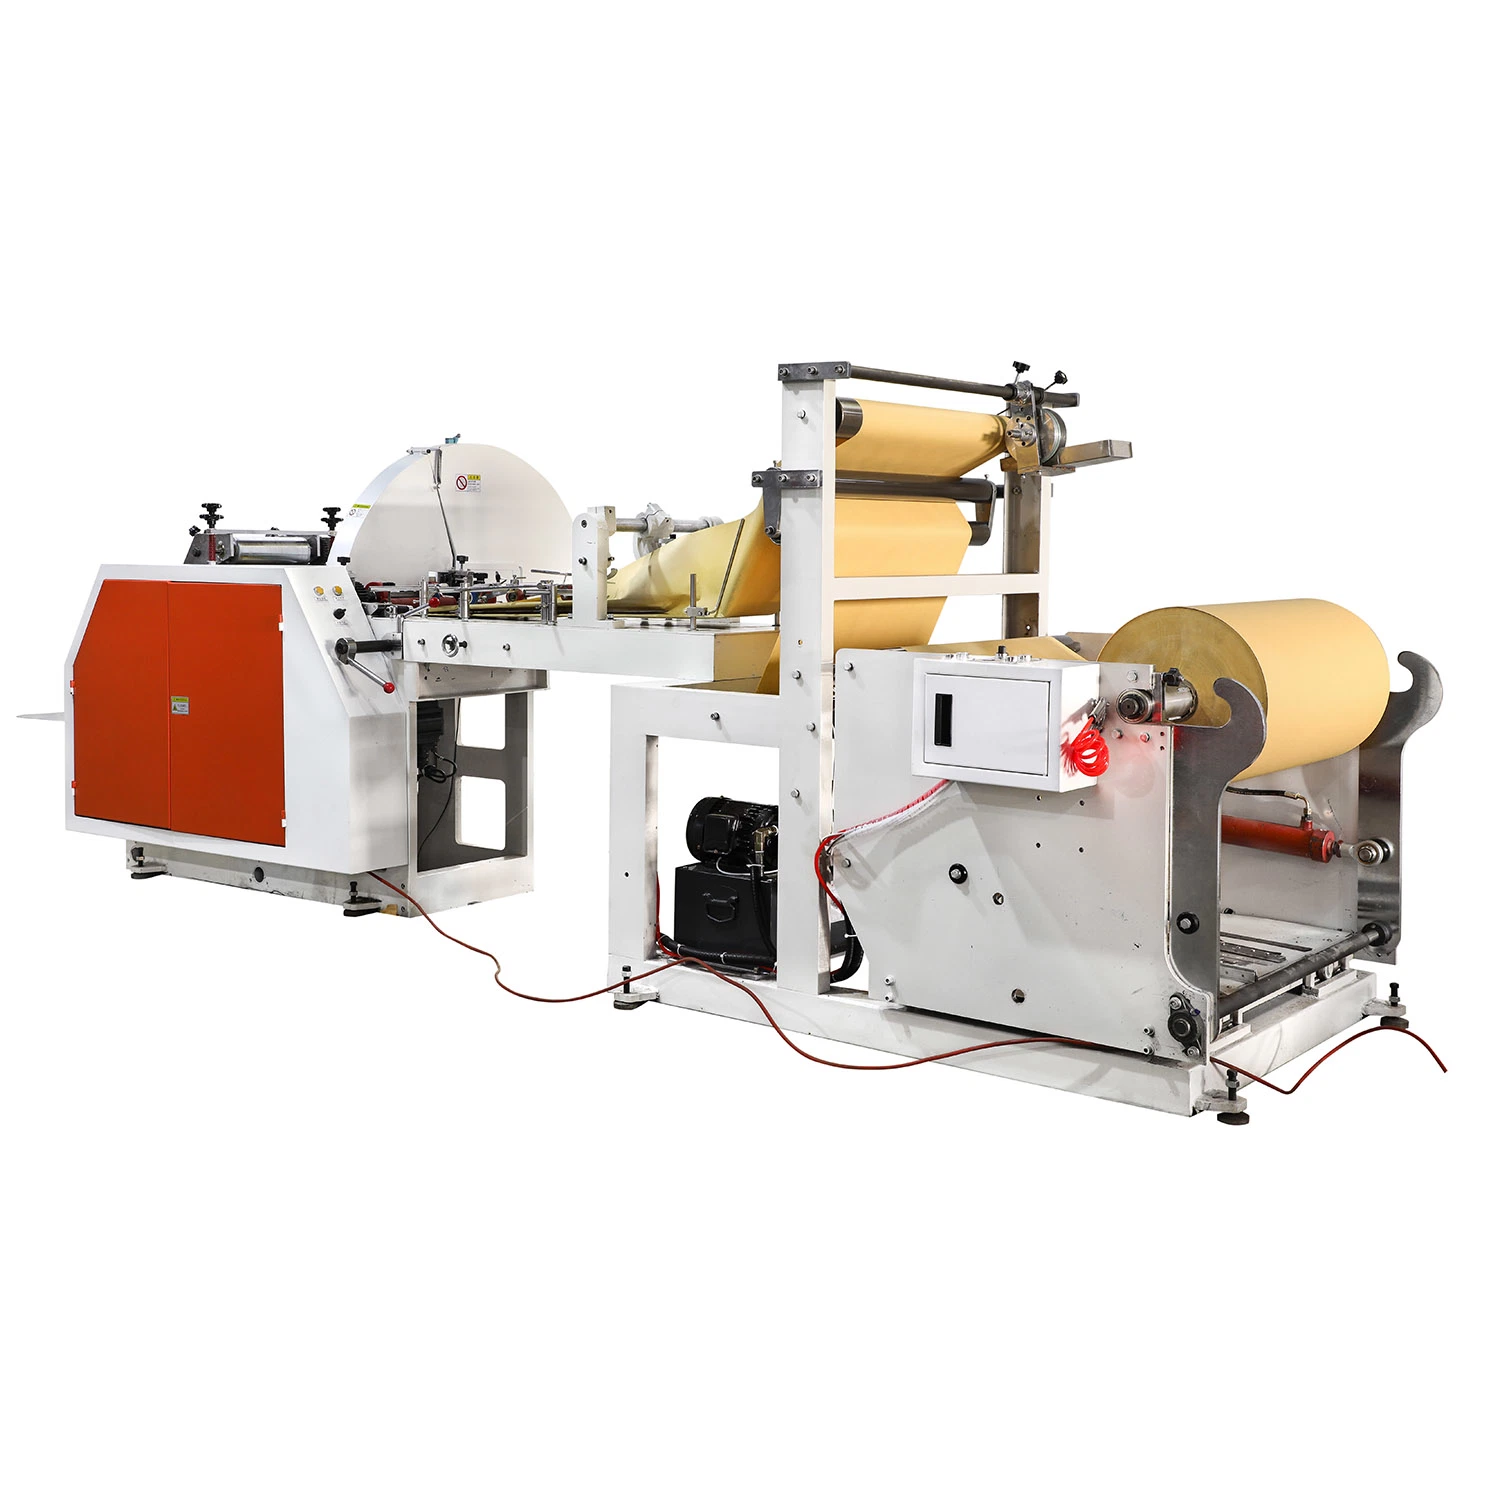 1450 Forming Xinke Packed in Wood Cartoon and Plastic Film Manufacturer Bread Paper Bag Making Machine